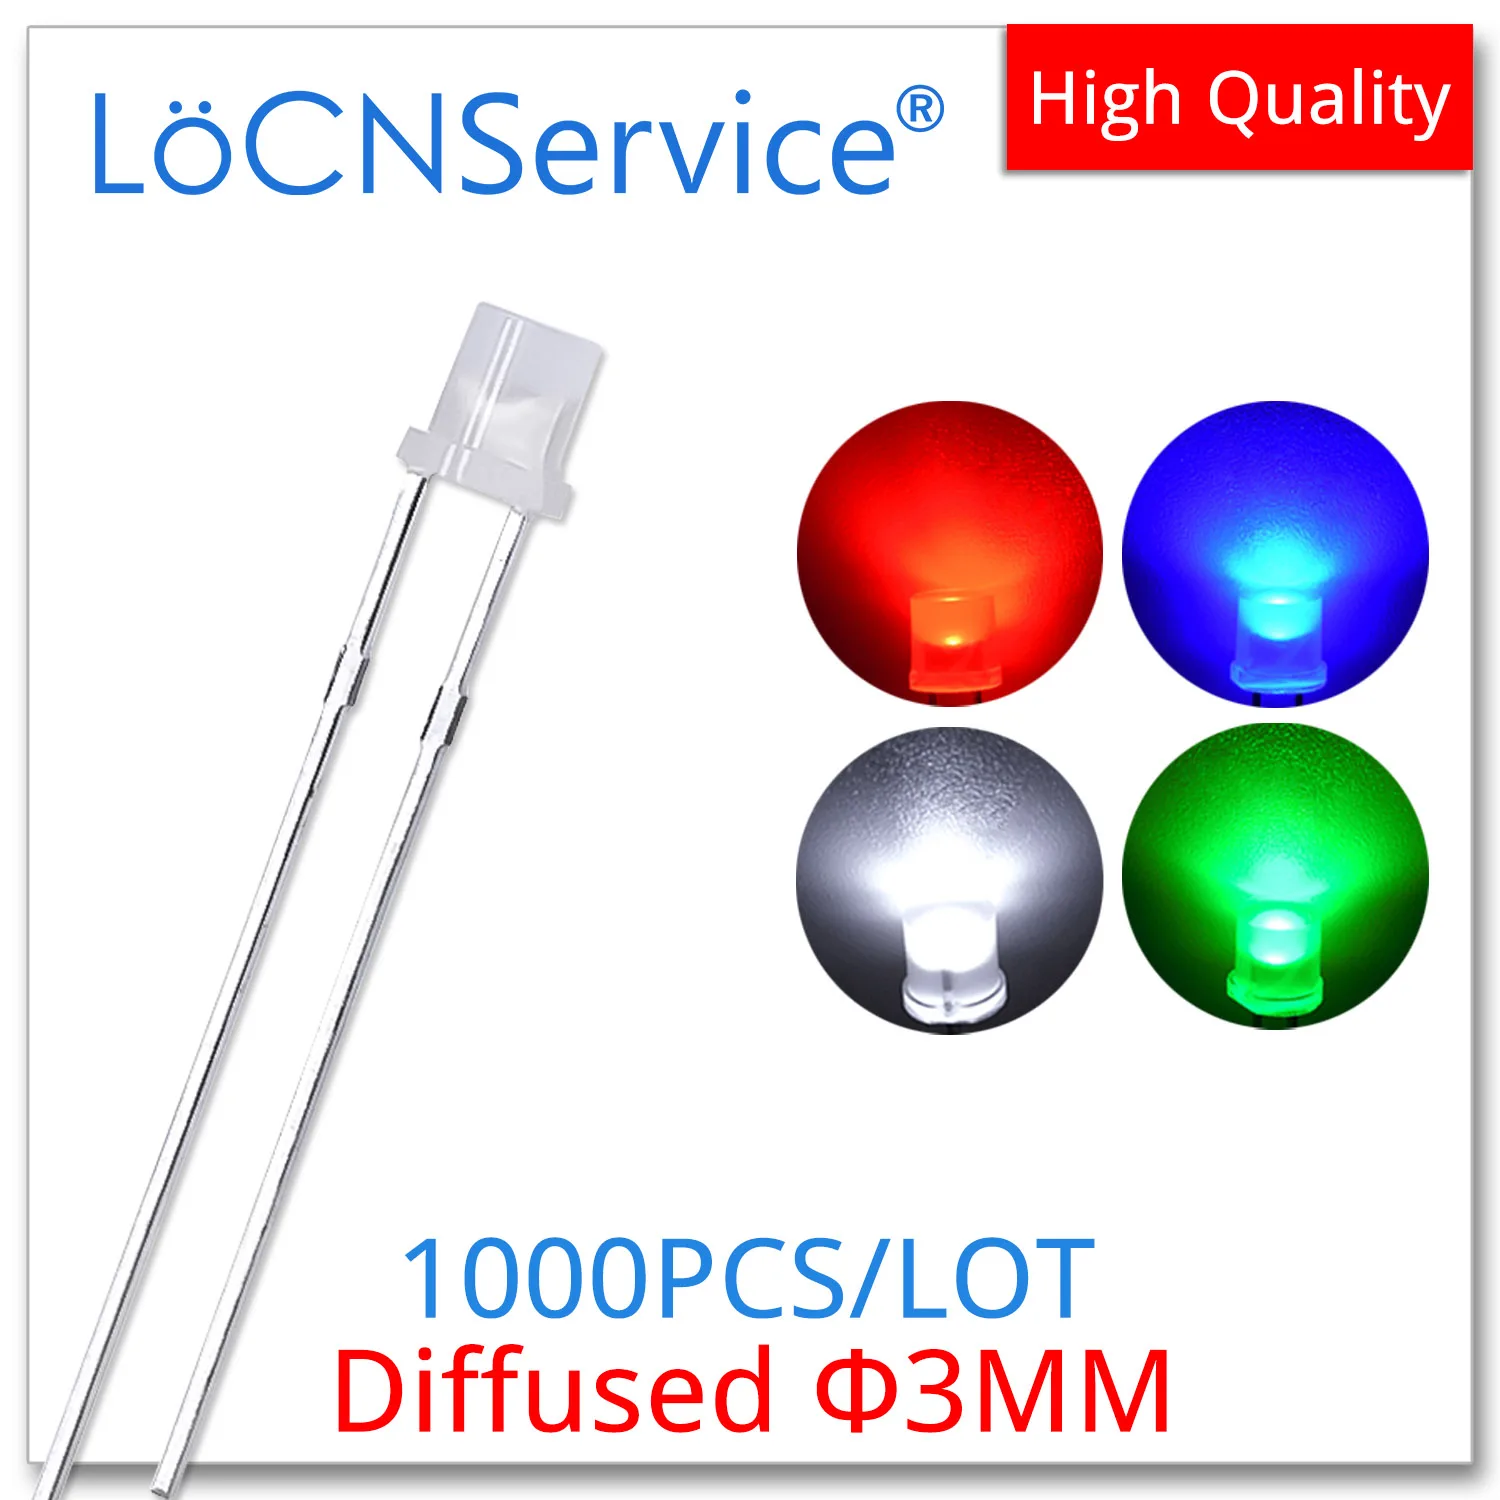 

LoCNService 1000PCS 3mm F3 Diffused Flat Top DIP LED Red Blue White Pure green Long Pins High quality bead light emitting diode